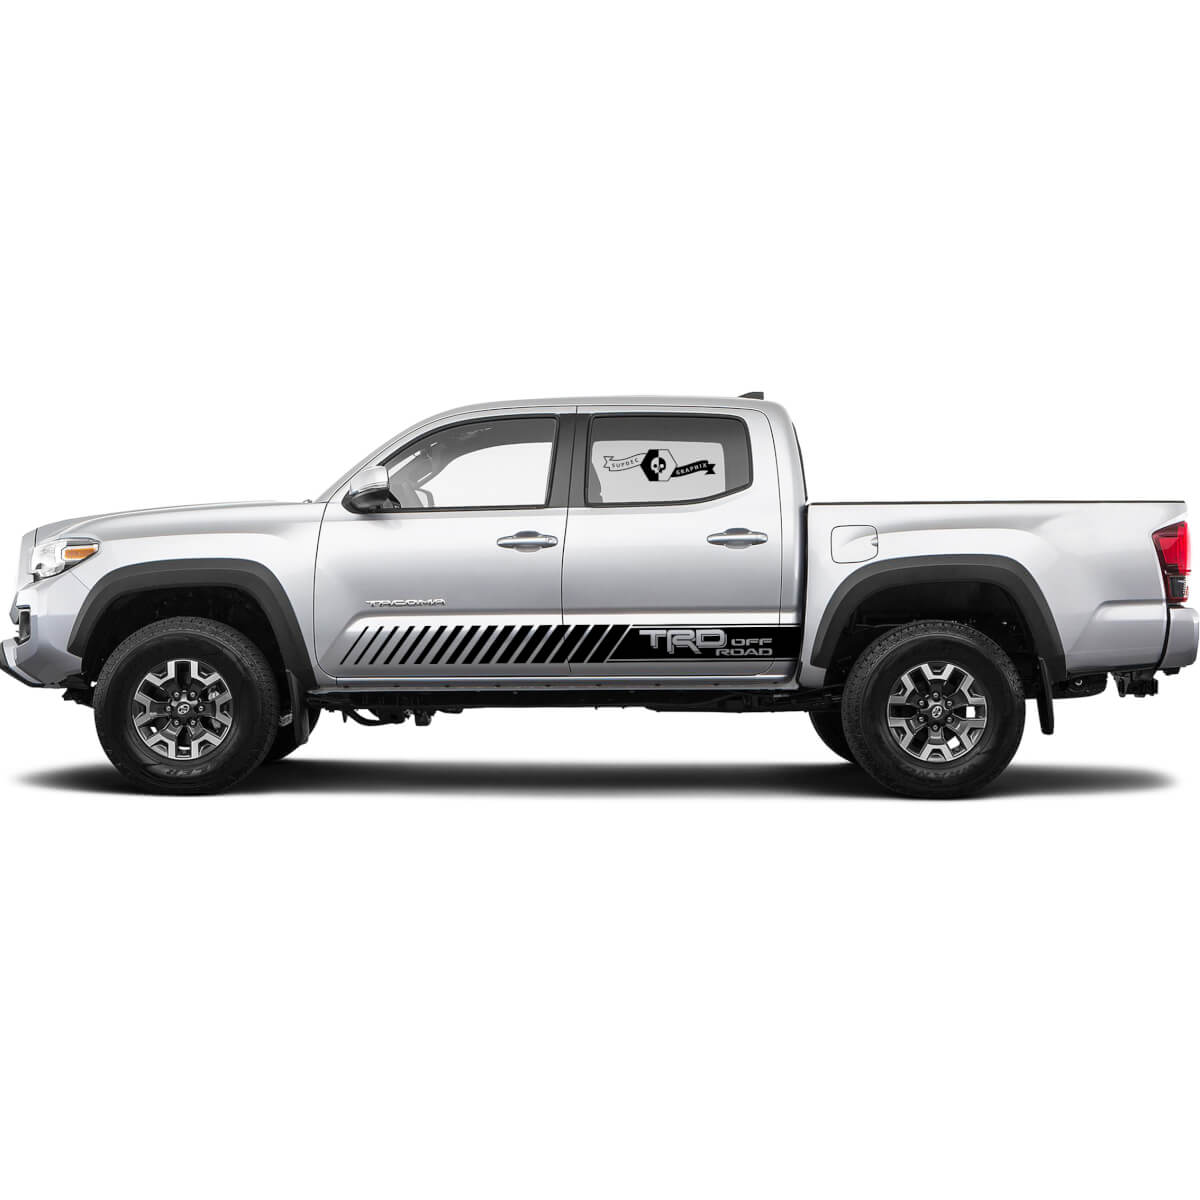 Toyota Tacoma Dash Side Trd Off Road Sport Pro Lines Side Vinyl Decal